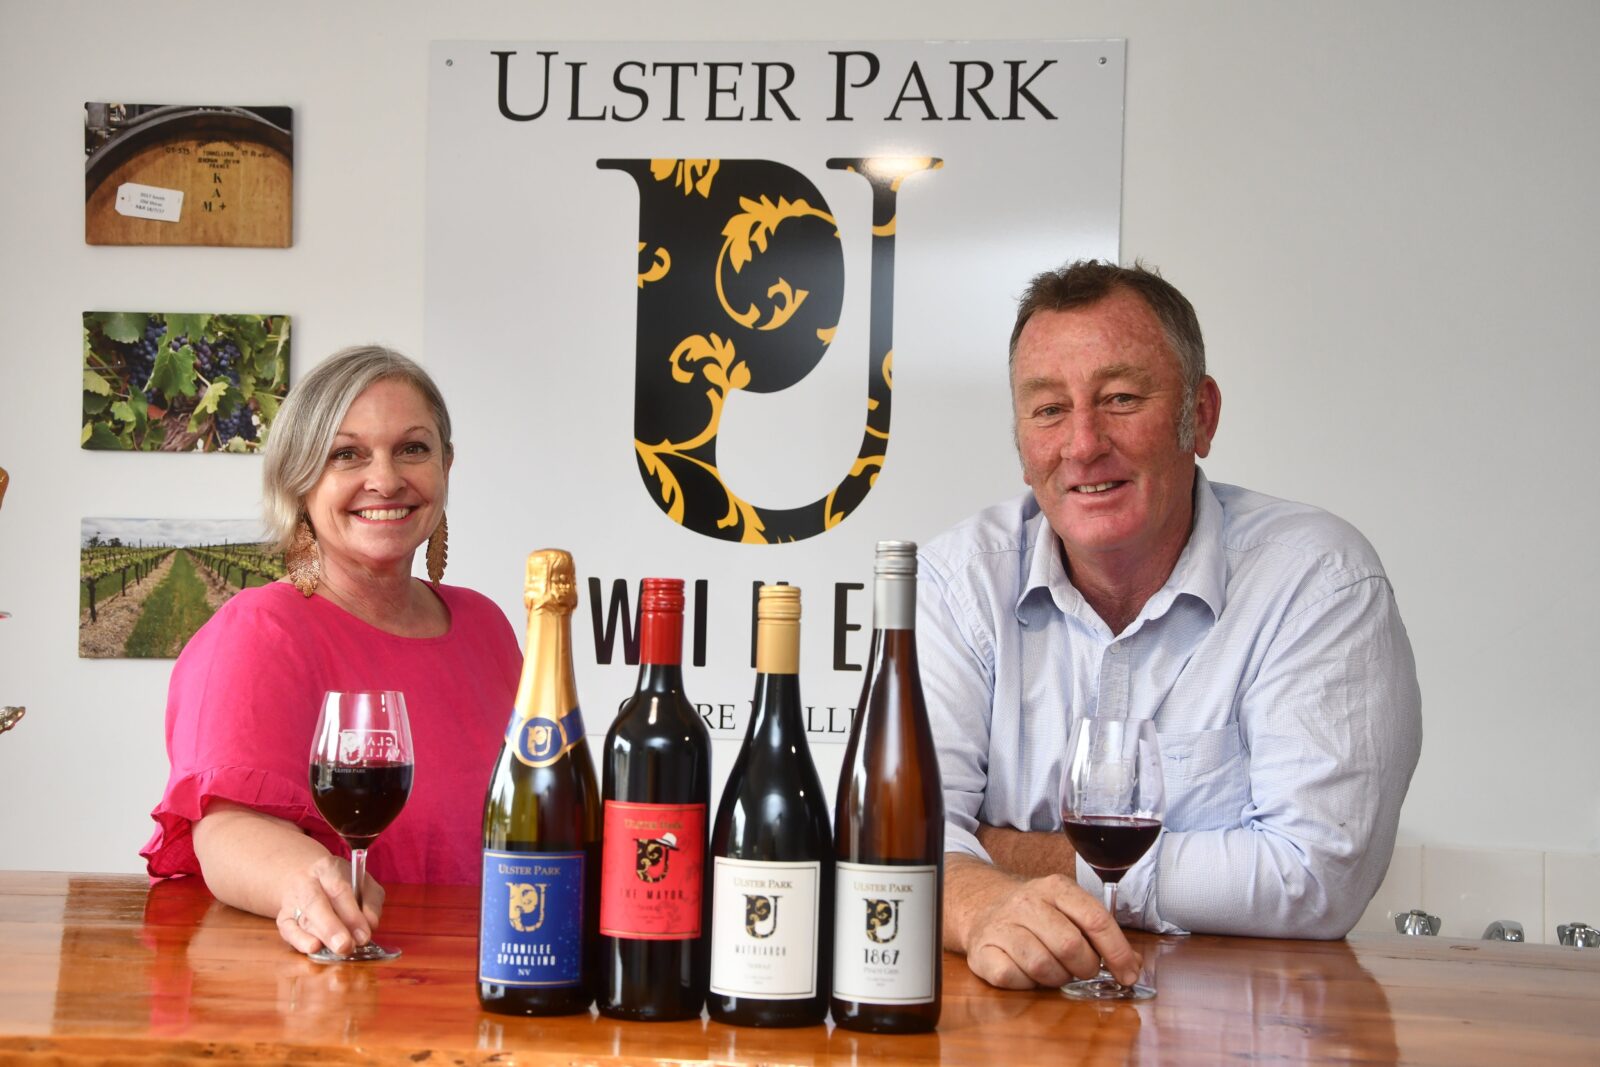 Ulster Park Wines owners Sharryn and Michael Smith